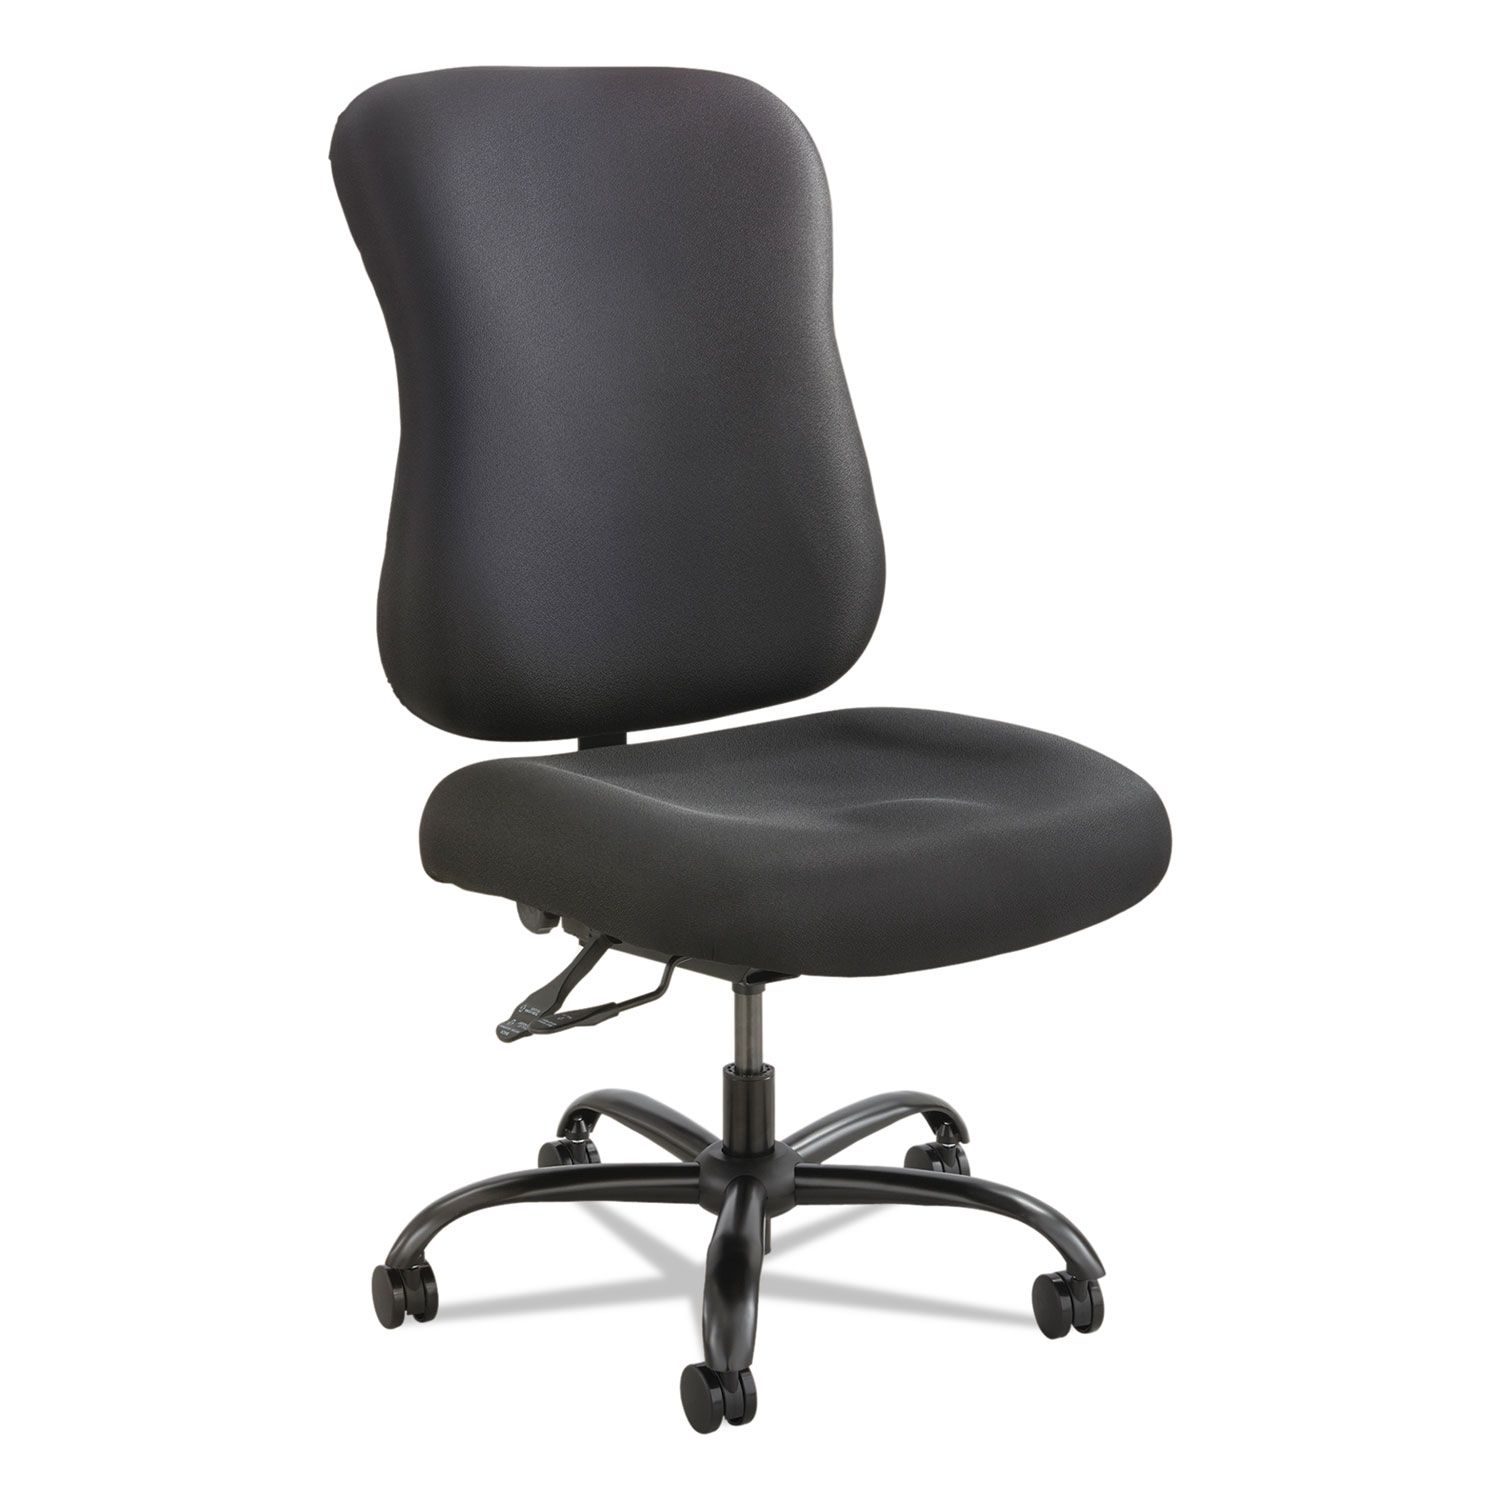  Safco 3590BL Optimus High Back Big and Tall Chair, Fabric Upholstery, Supports up to 400 lbs., Black Seat/Black Back, Black Base (SAF3590BL) 